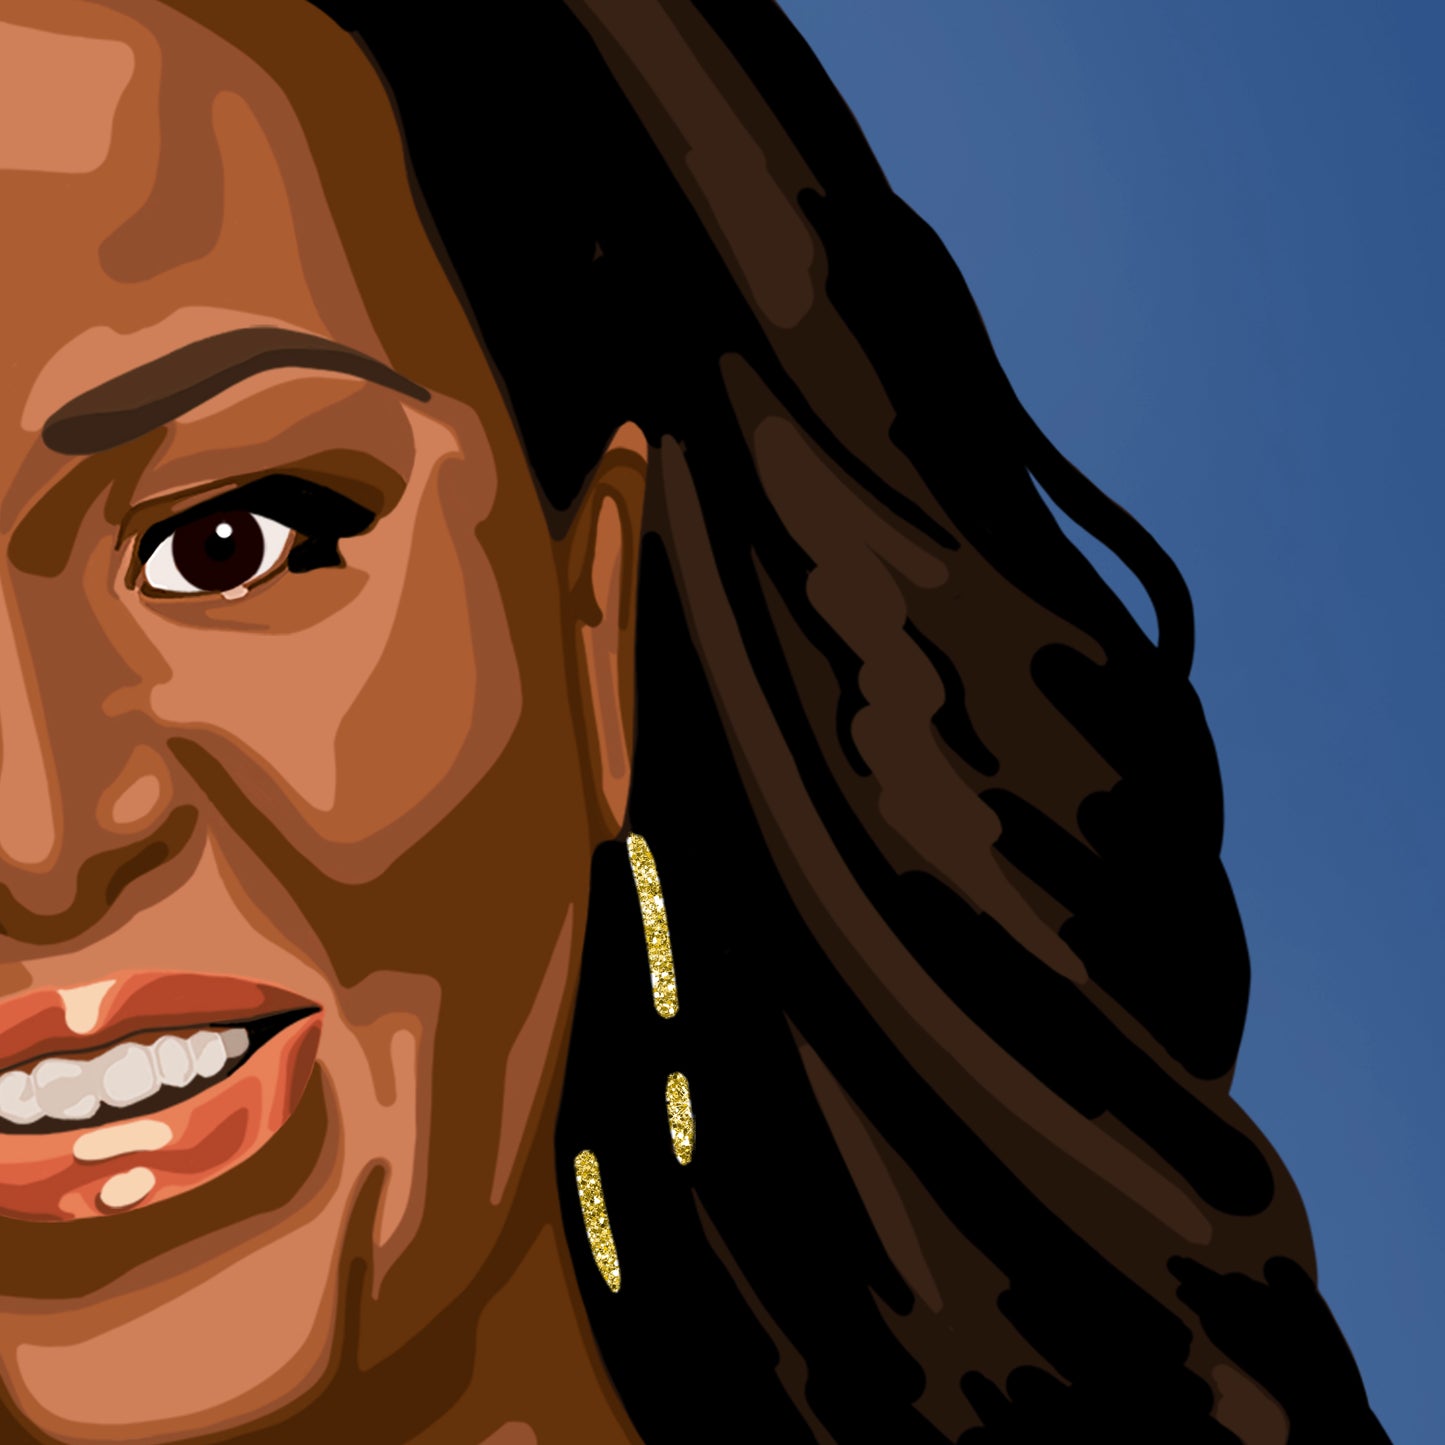 Michelle Obama portrait feat. 'This Is Who We Are' quote, closeup - Candid Almond